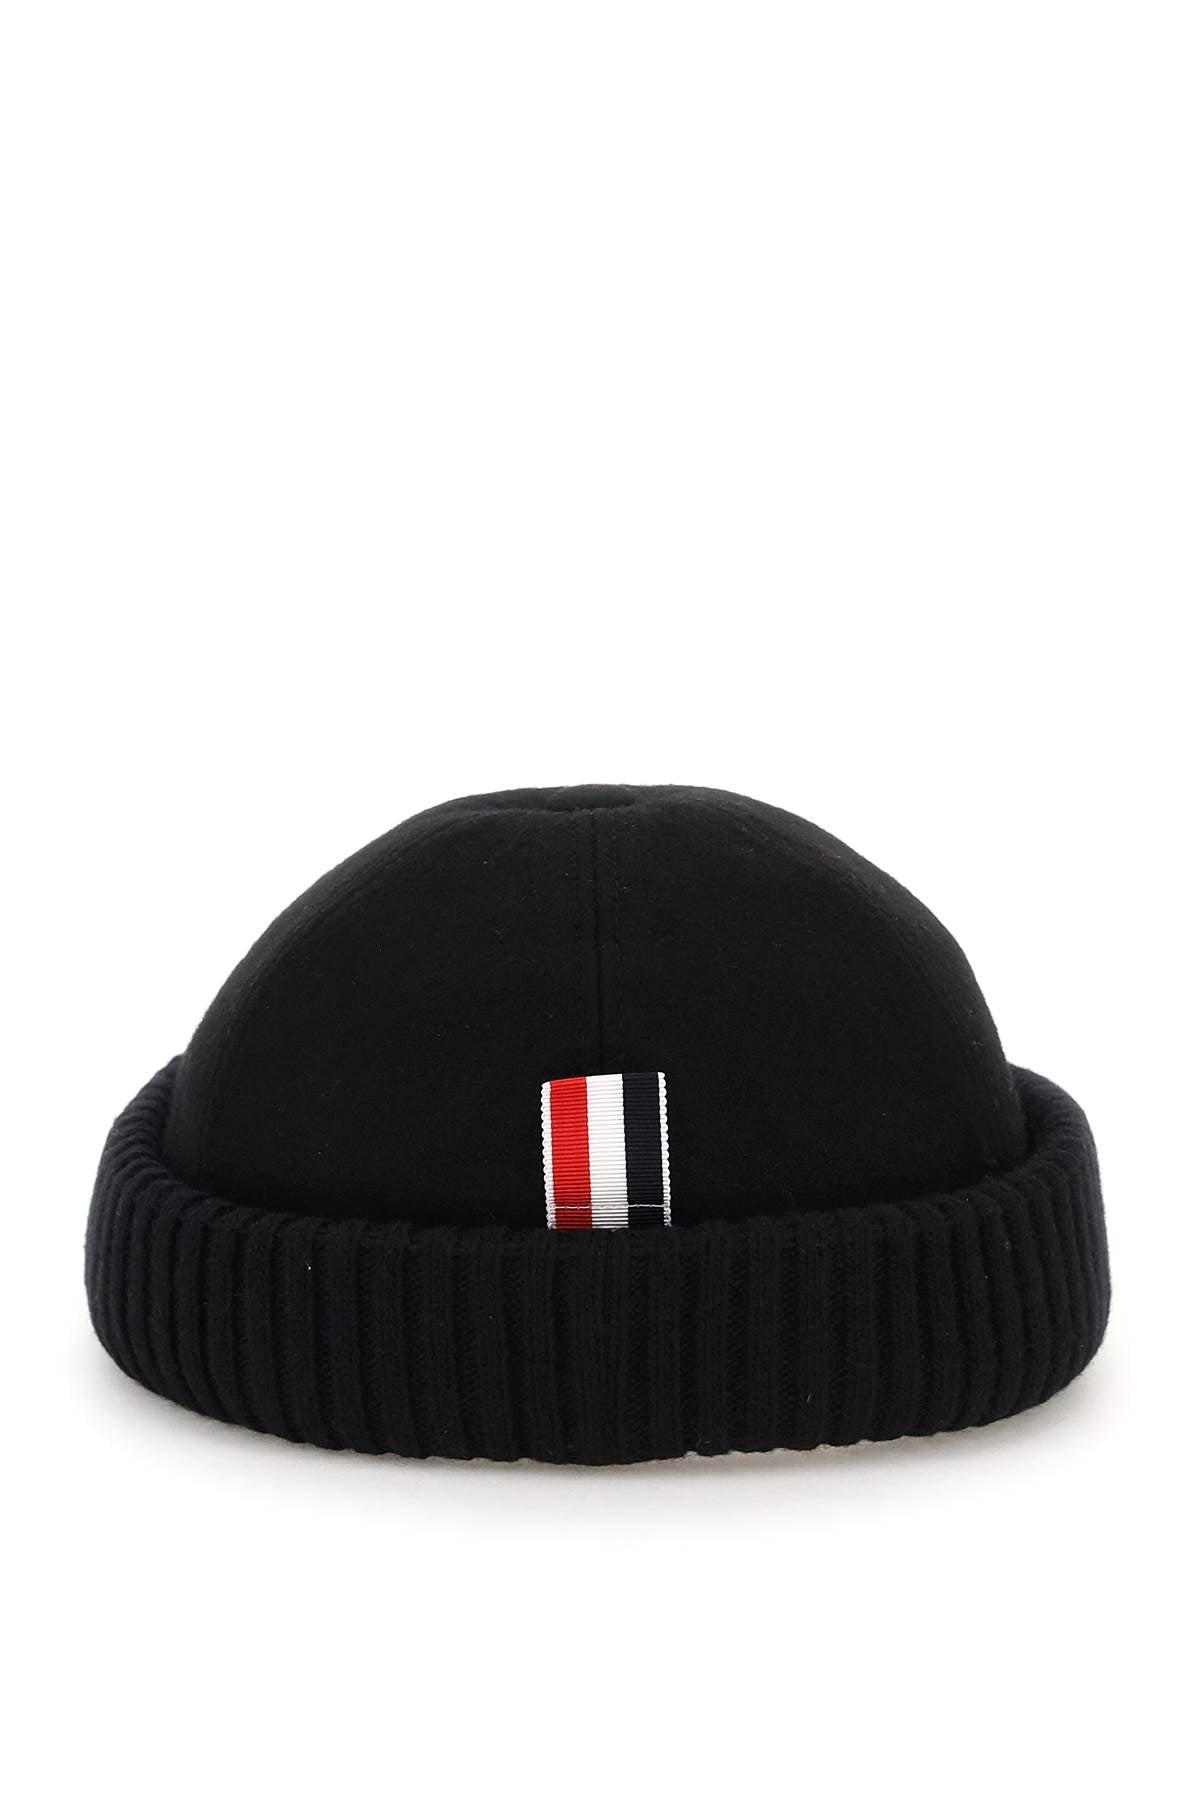 Mens Accessories Hats Thom Browne Wool Melton Hat With Rib Knit Cuff in Black for Men Save 28% 